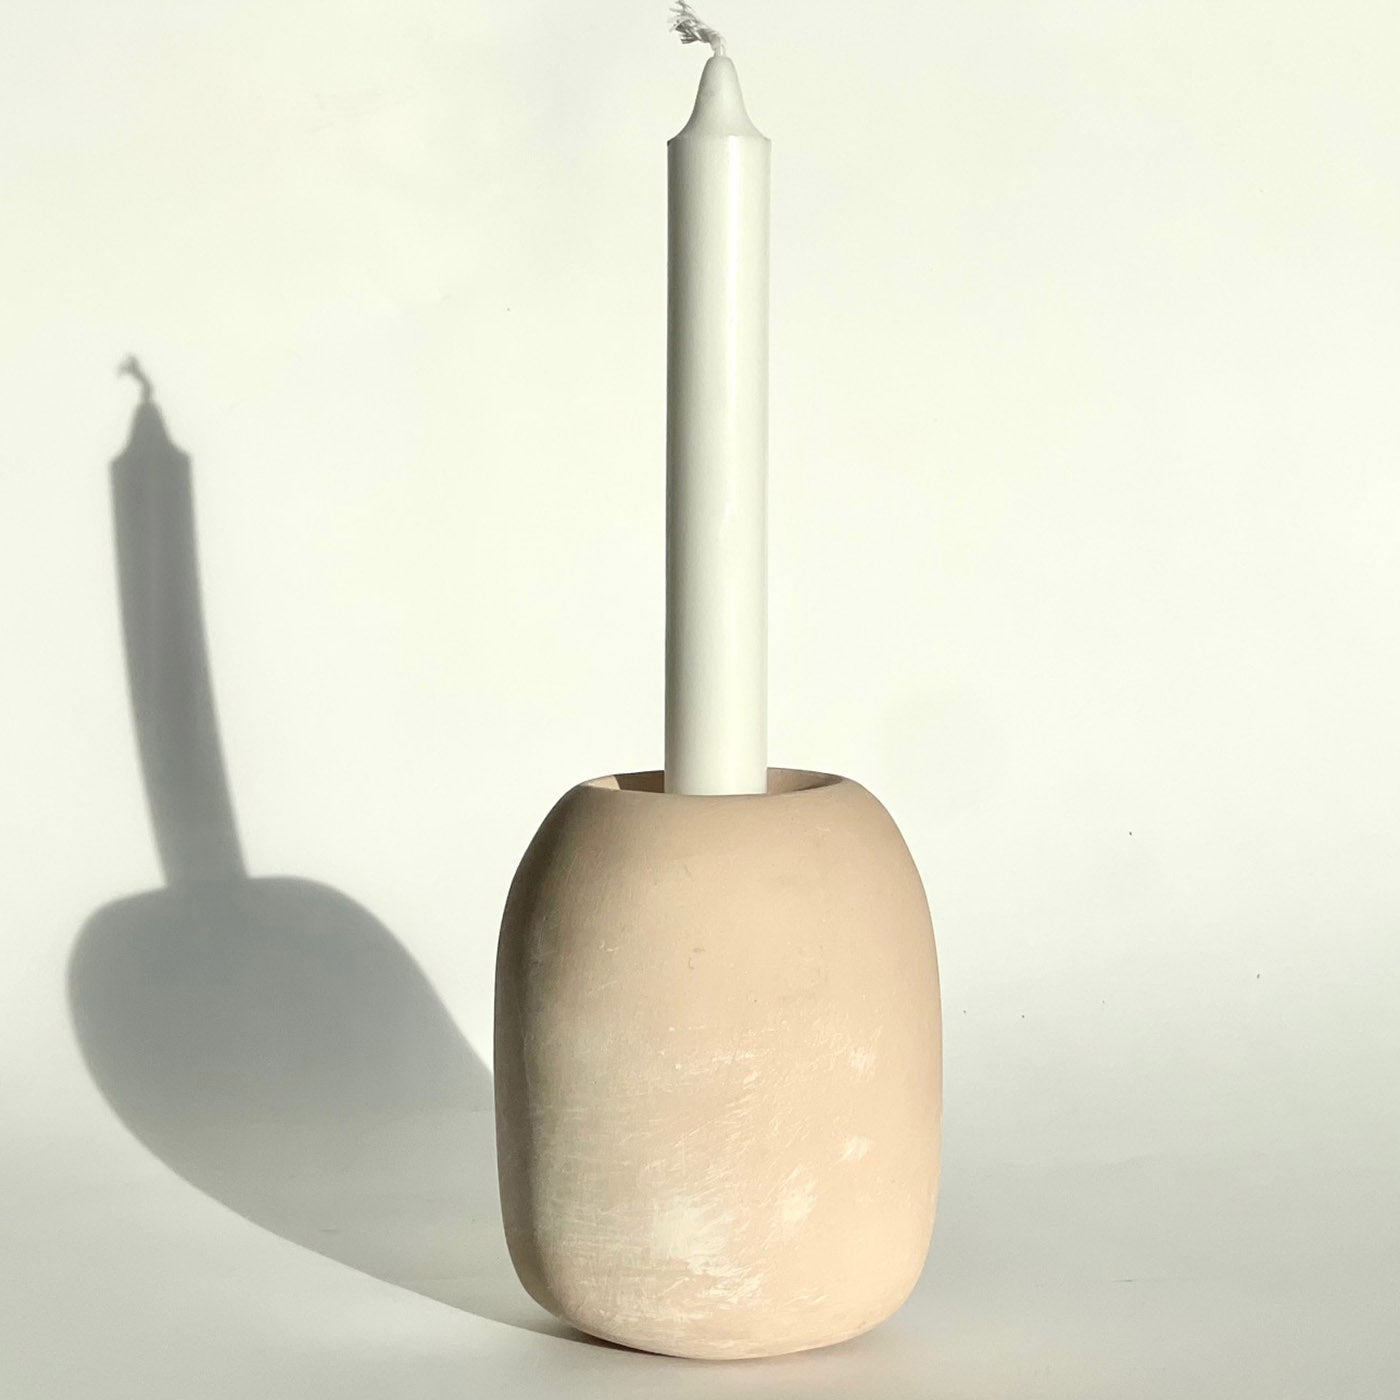 Solo Candle Holder - Alternative view 2